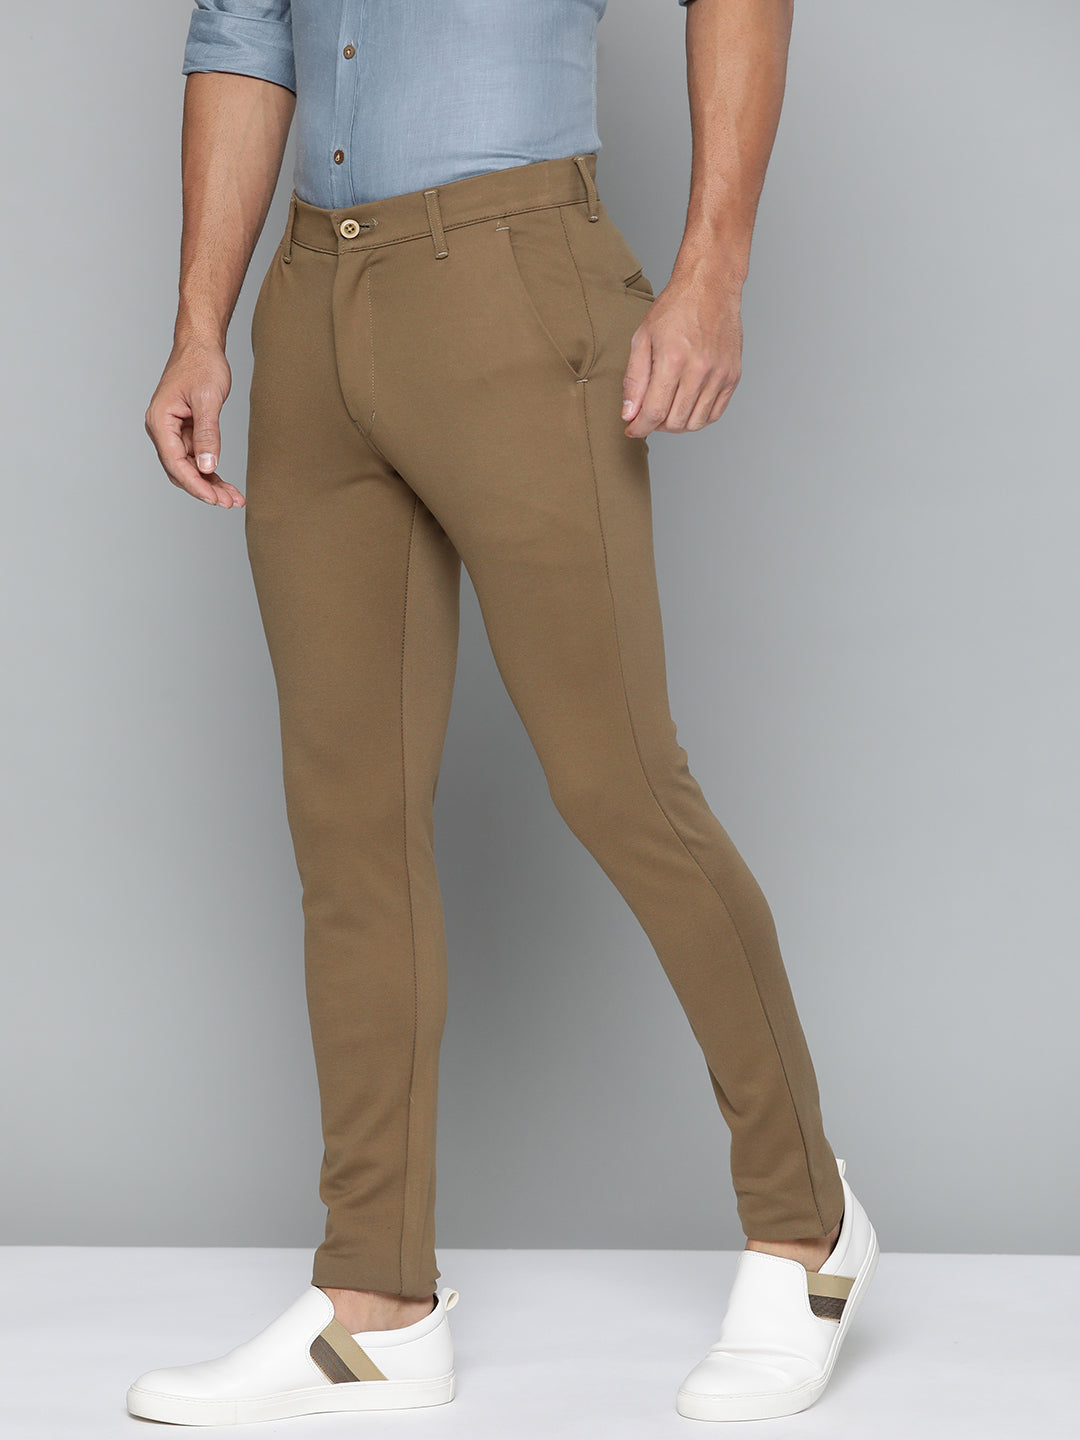 DENNISON Men Khaki Smart Tapered Fit Easy Wash Chinos Trousers